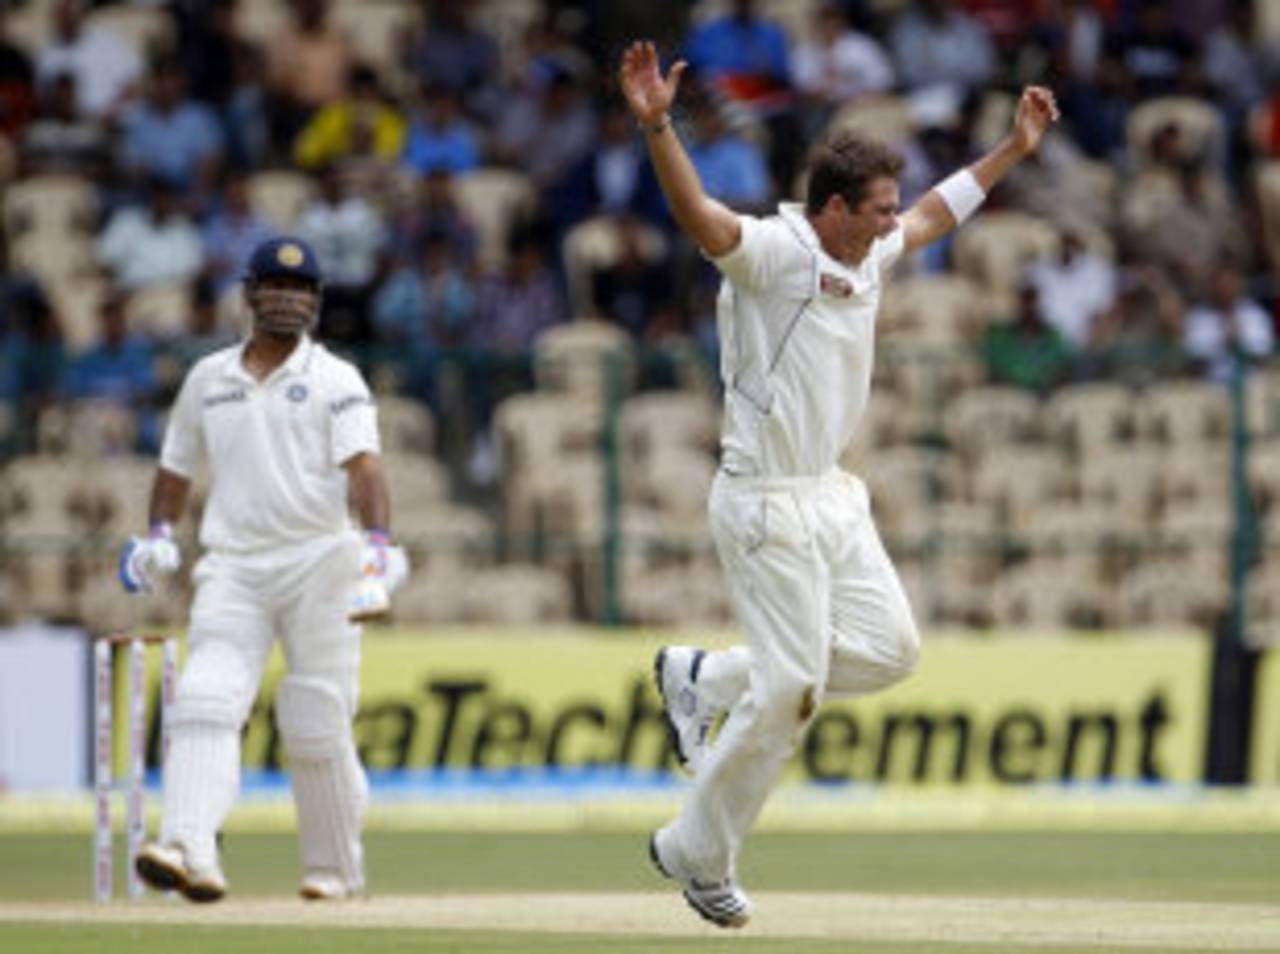 Tim Southee is ecstatic after dismissing MS Dhoni, India v New Zealand, 2nd Test, Bangalore, 3rd day, September 2, 2012